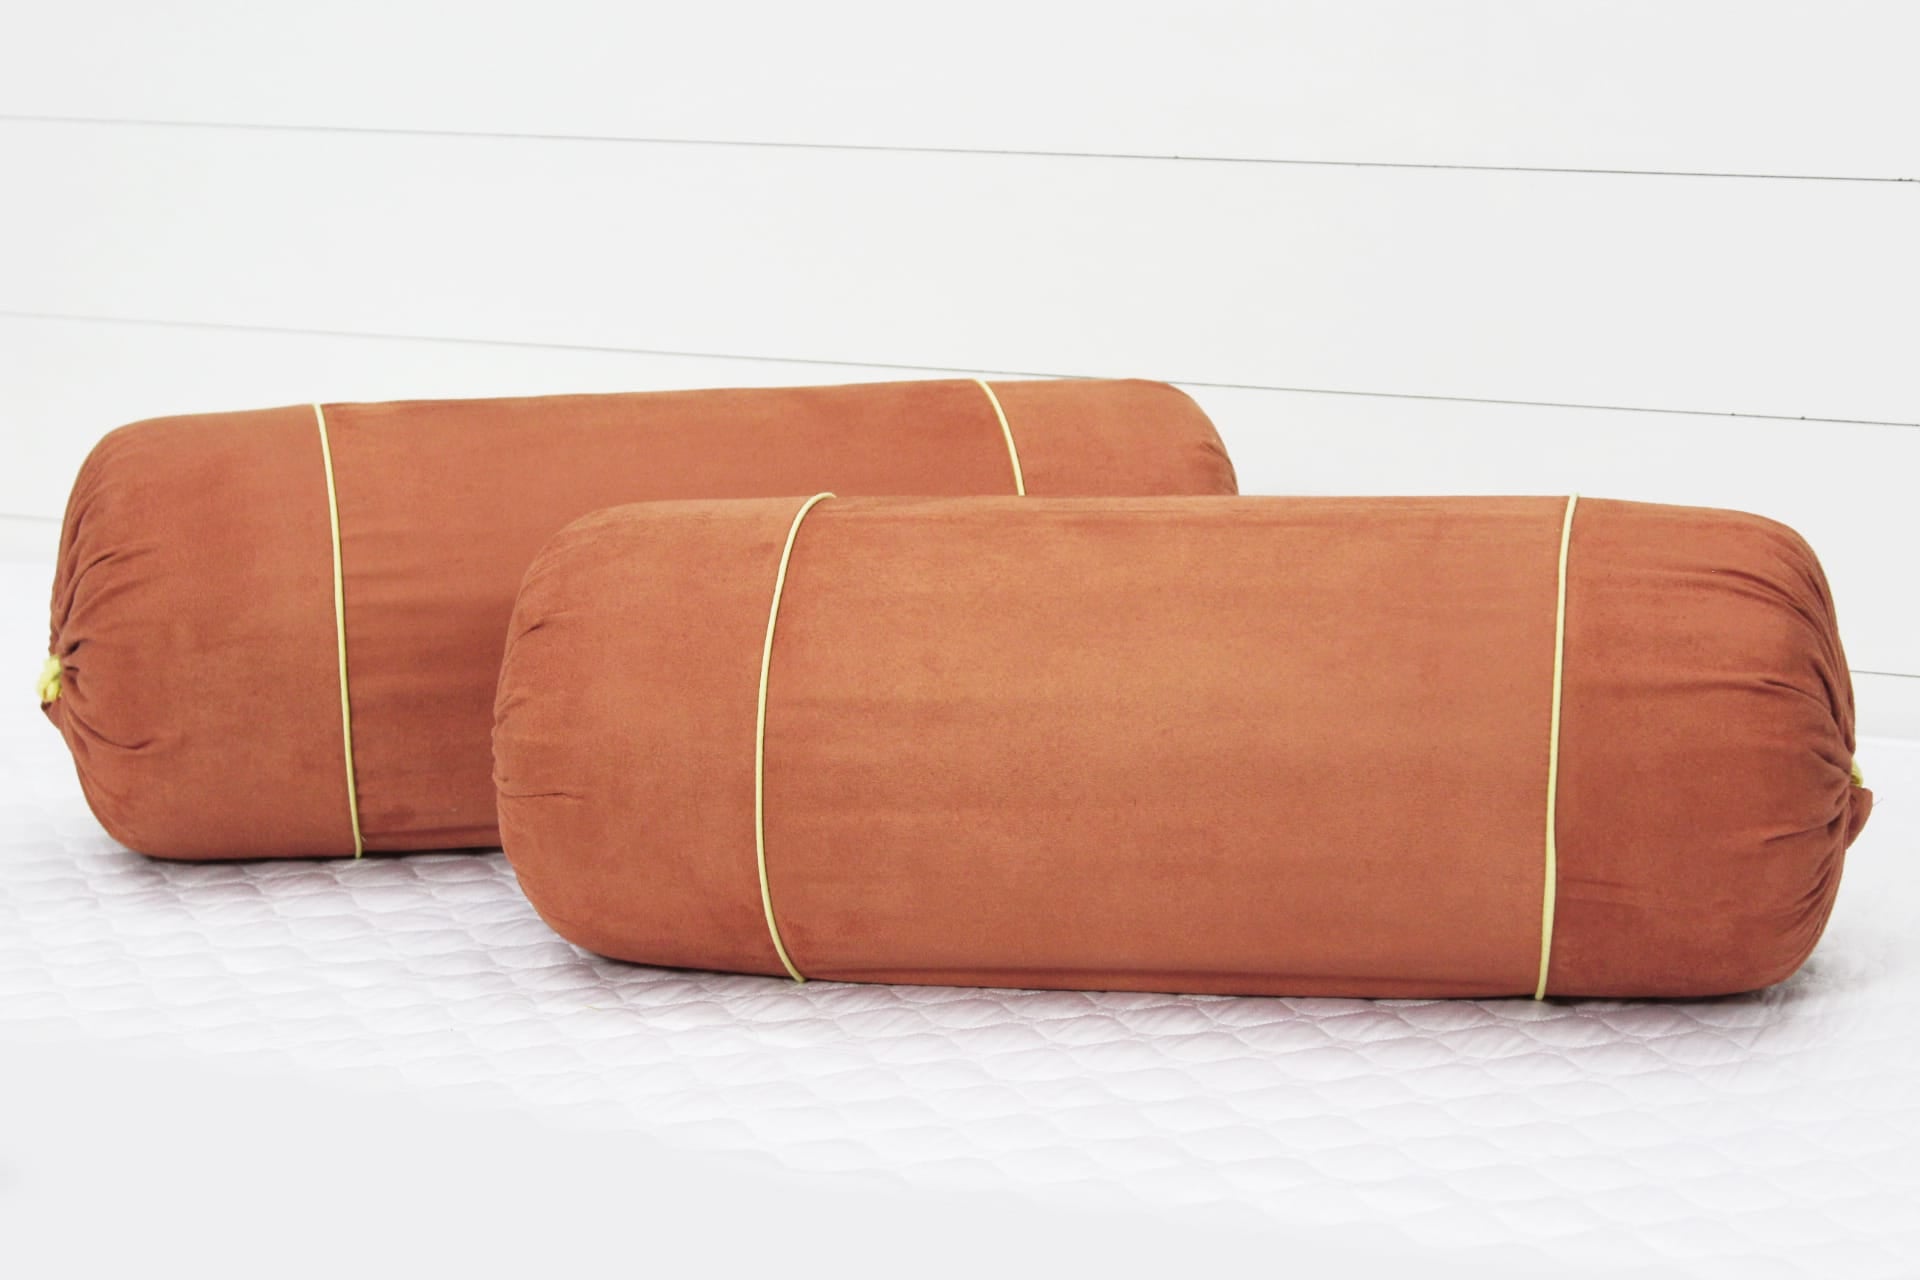 Luxurious Orange Velvet Bolster Cover Set in Imported Suede Polyester Material -2Pcs